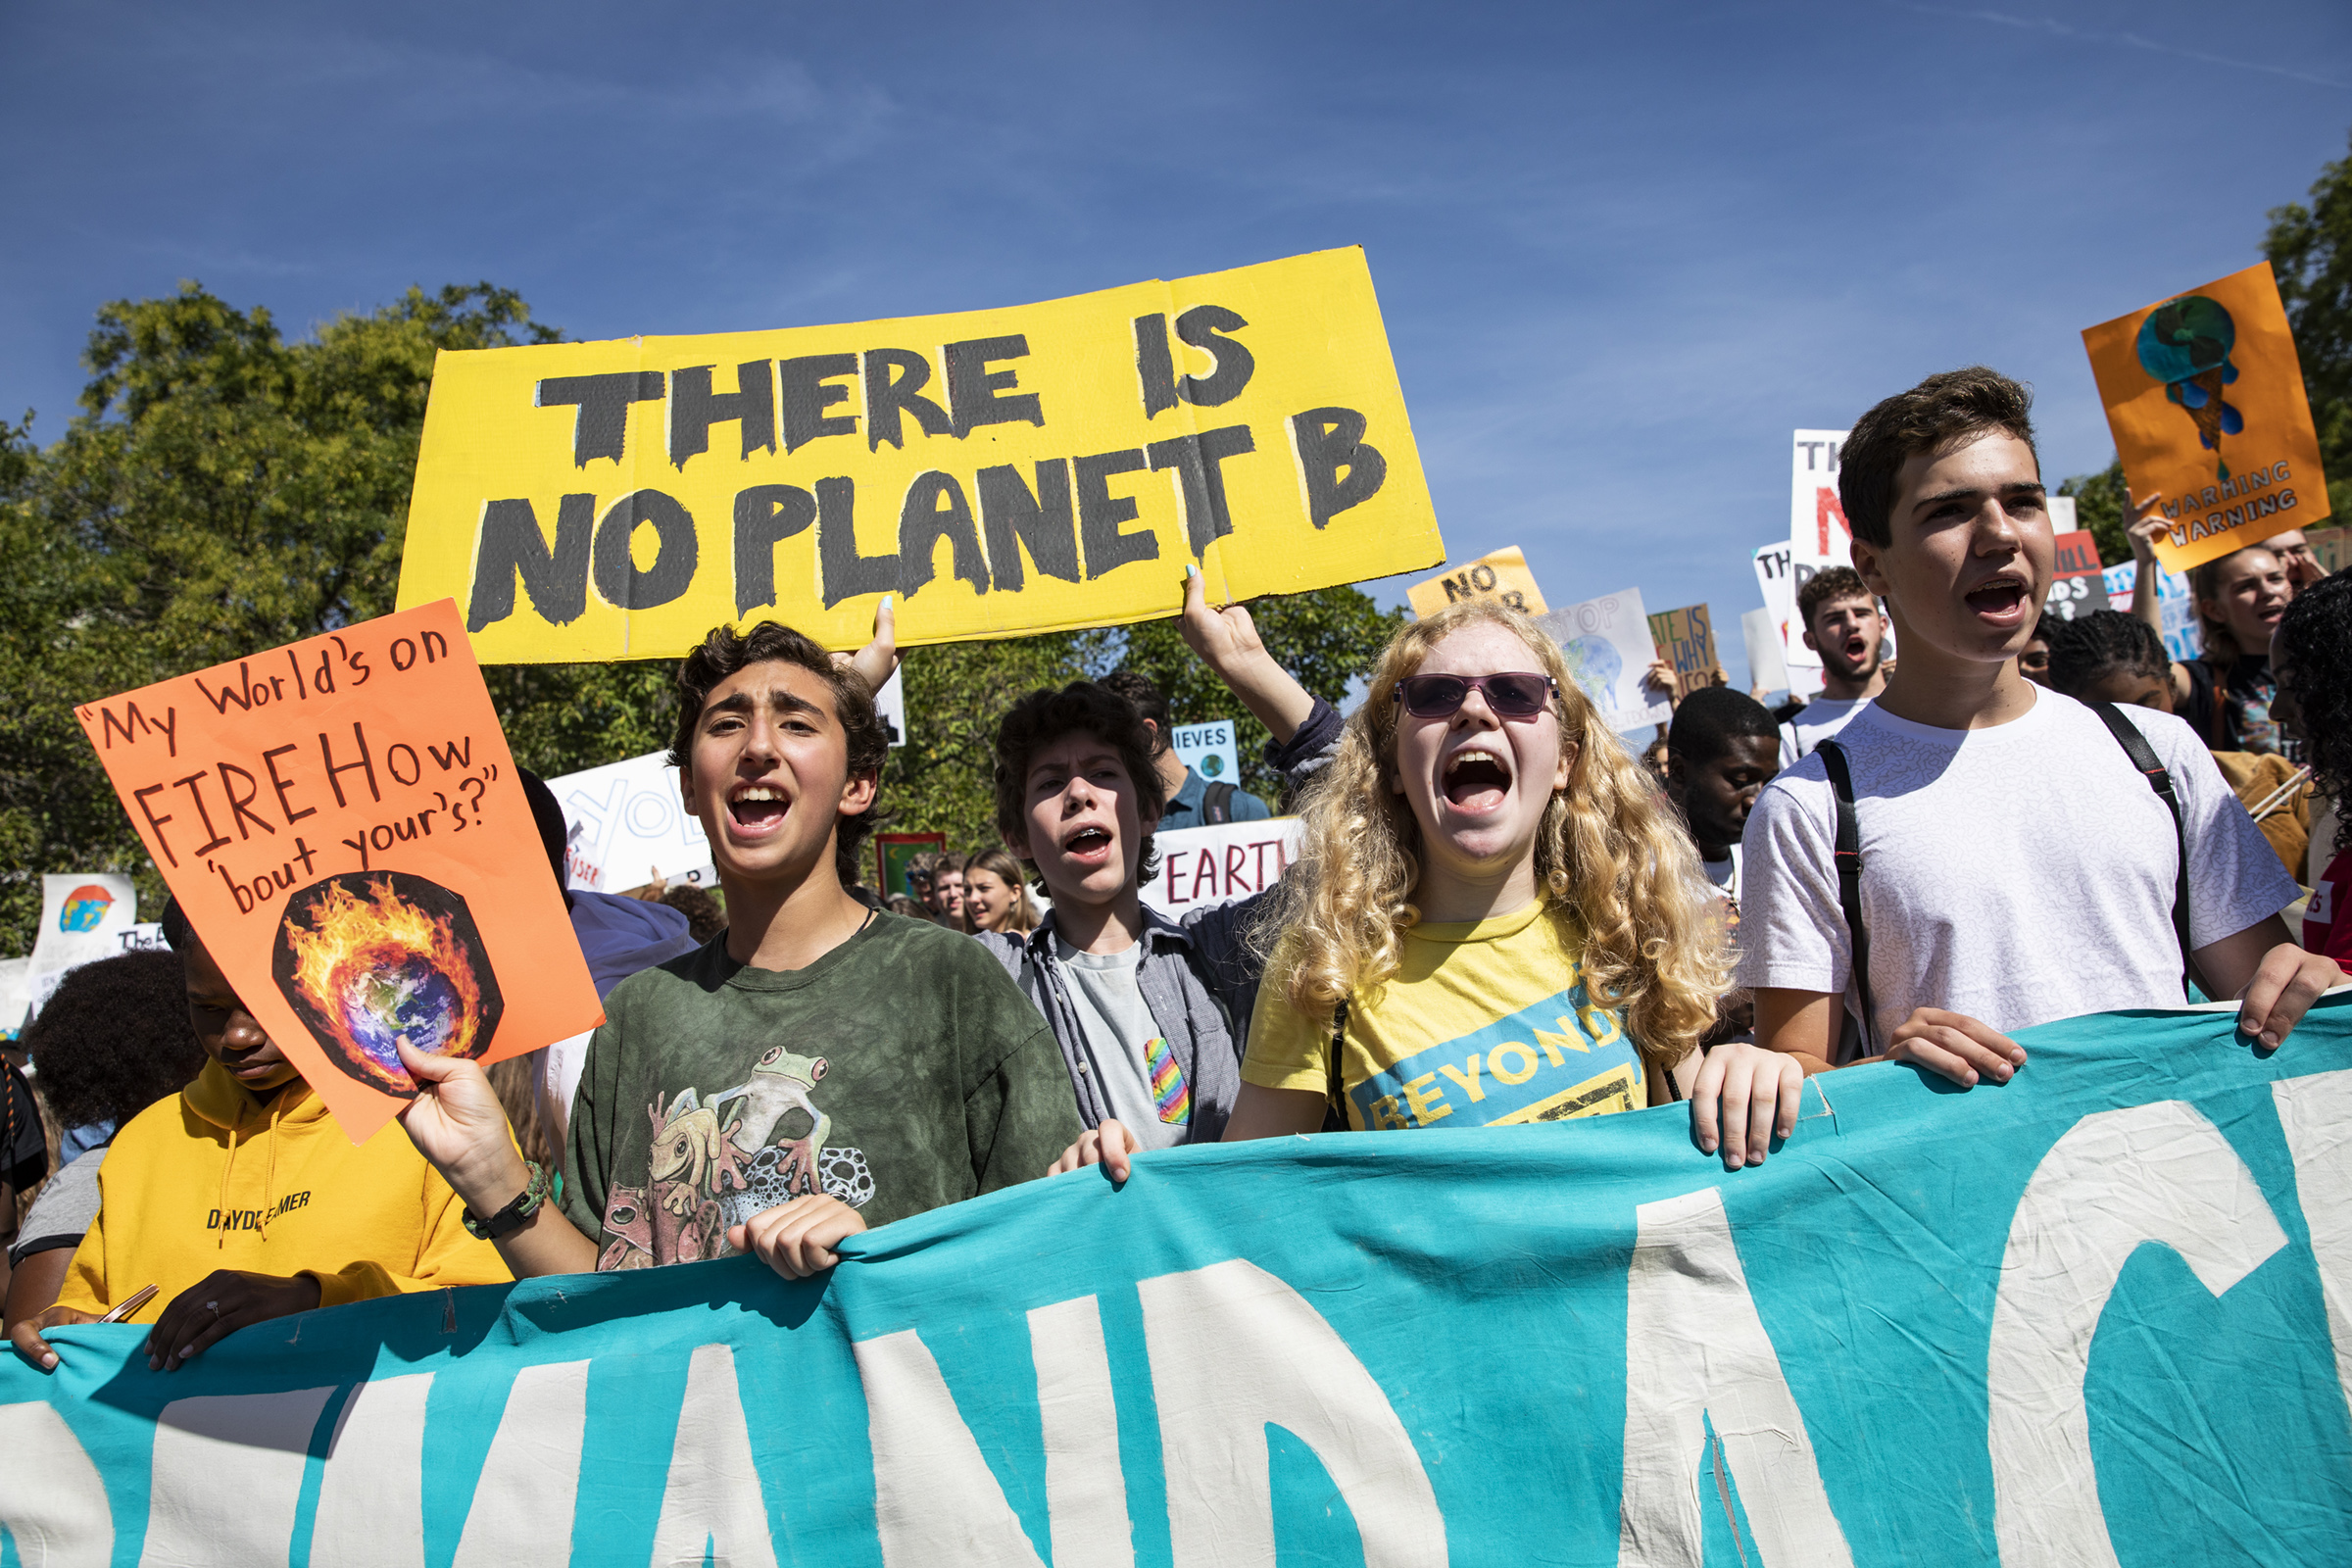 Activists gather in John Marshall Park for the Global Climate Strike protests in Washington, D.C. on Sept. 20, 2019. (Samuel Corum—Getty Images)